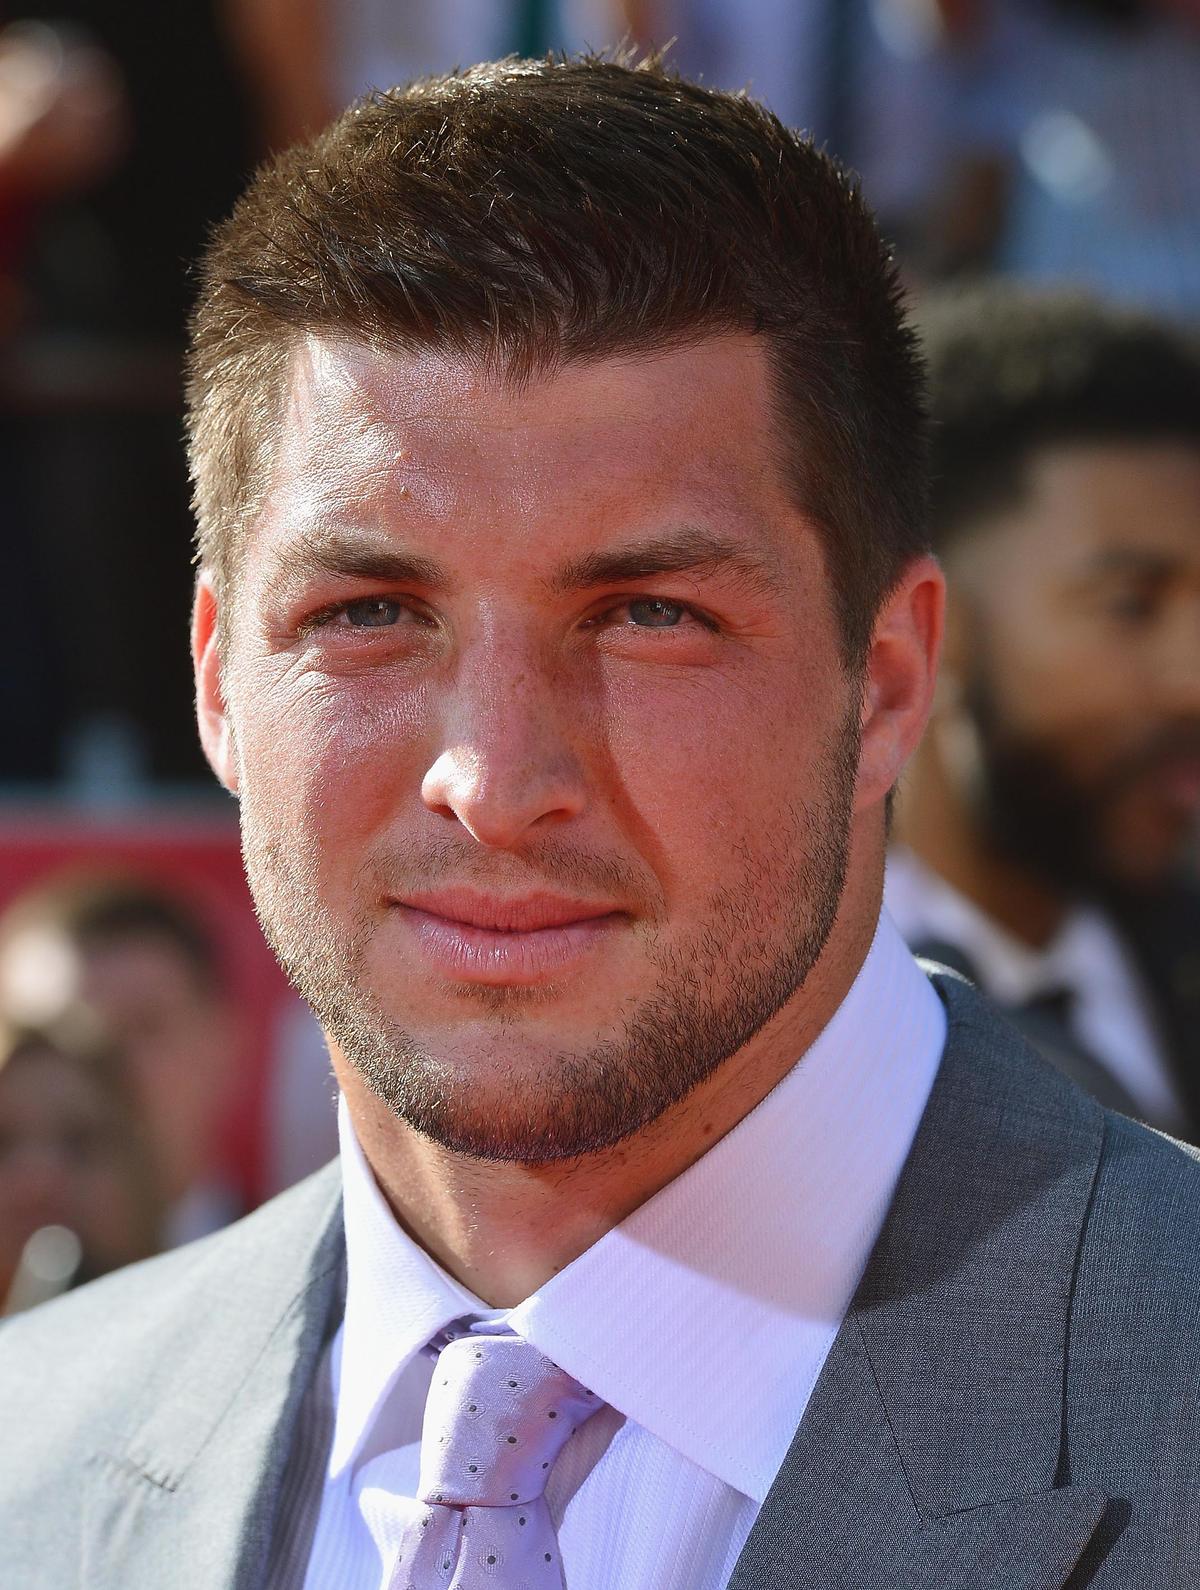 Tim Tebow of the New York Jets arrives at the 2012 ESPY Awards at Nokia Theatre L.A. Live on July 11, 2012, in Los Angeles, California. (Frazer Harrison/Getty Images)